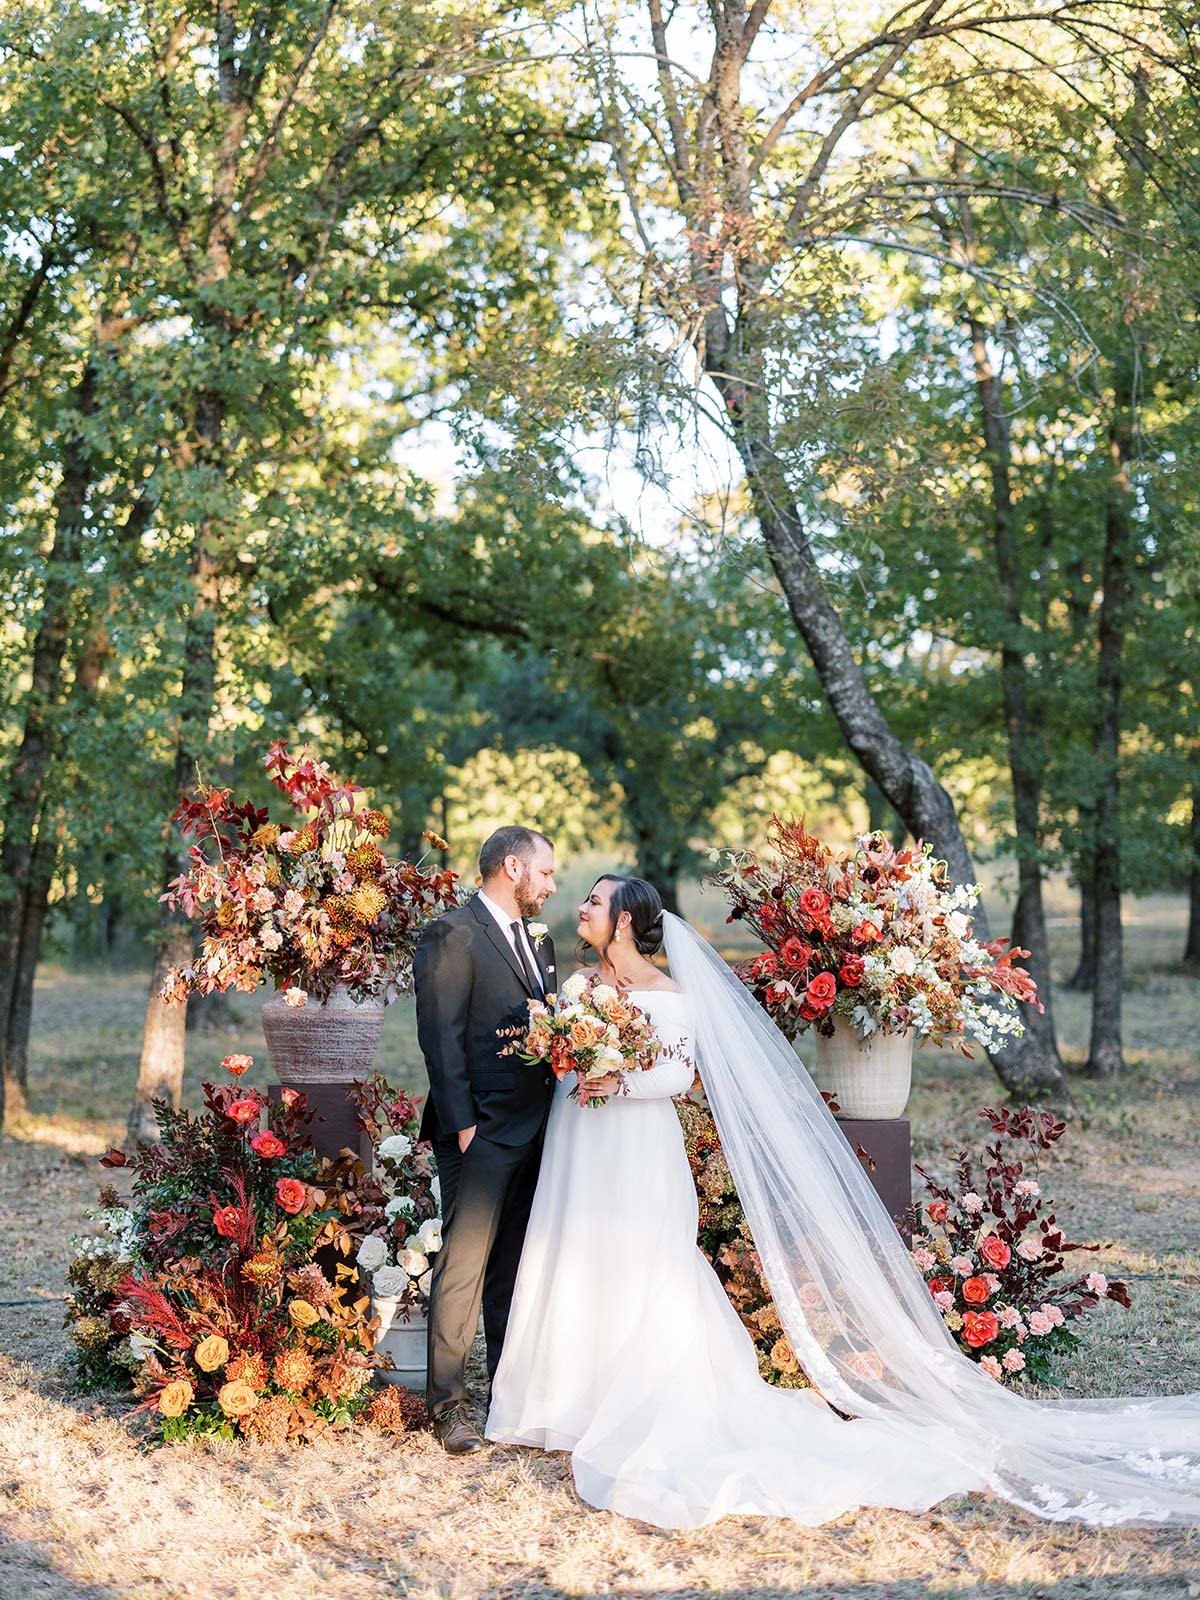 Bride &amp; Groom standing in front of red ceremony flowers at Texas wedding by Ranch wedding planner Shannon Rose Events